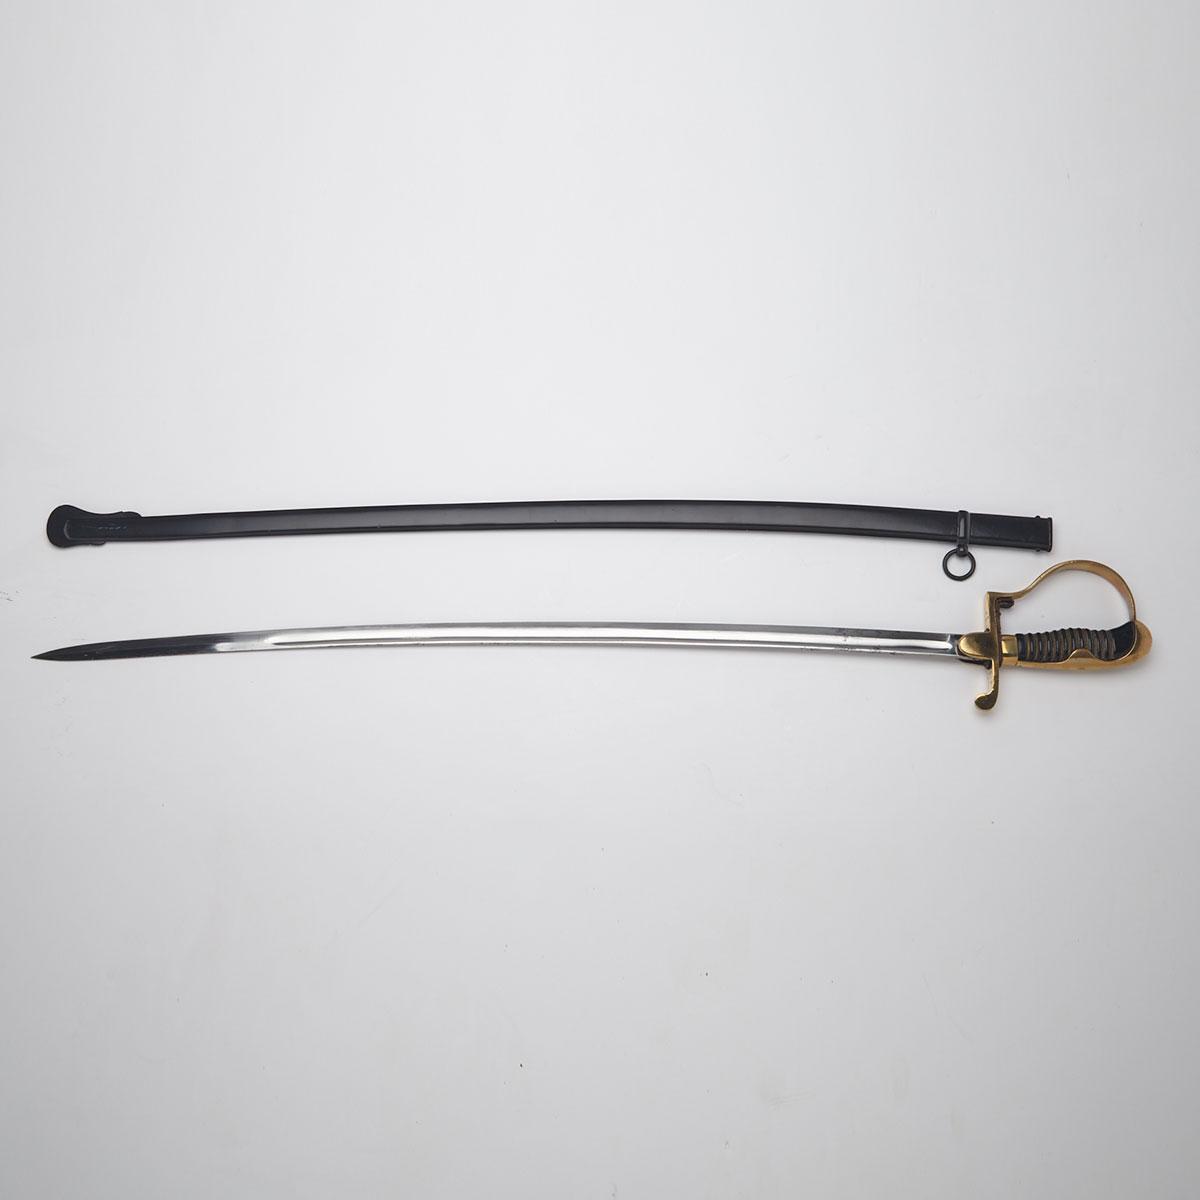 WWII German Officer’s Sword, mid 20th century